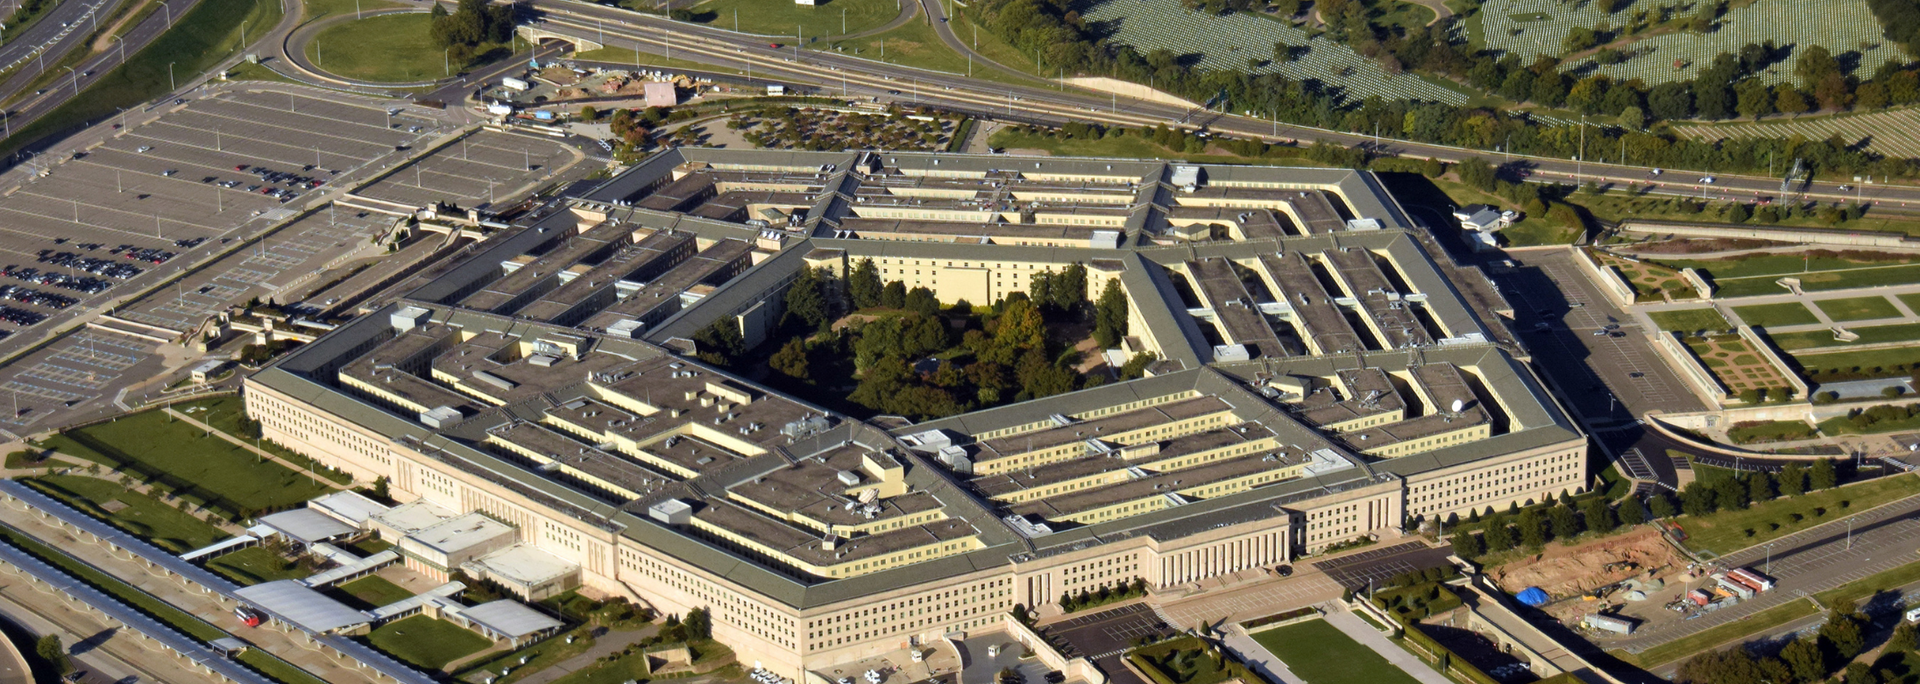 Picture of the Pentagon